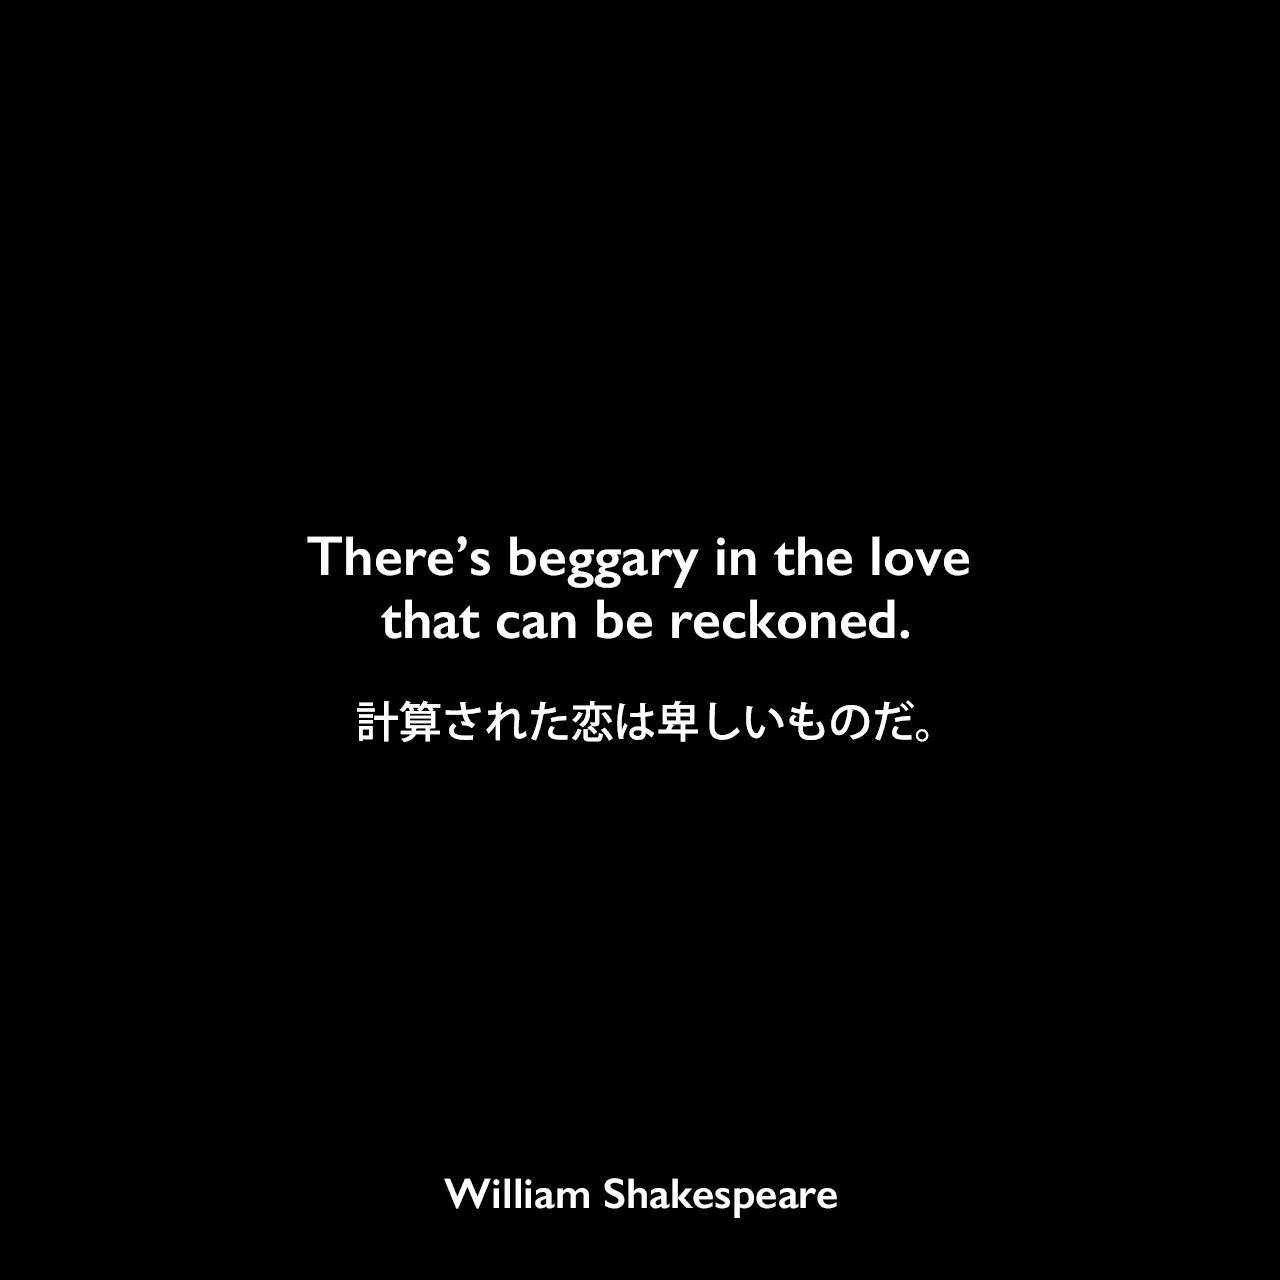 There’s beggary in the love that can be reckoned.計算された恋は卑しいものだ。William Shakespeare